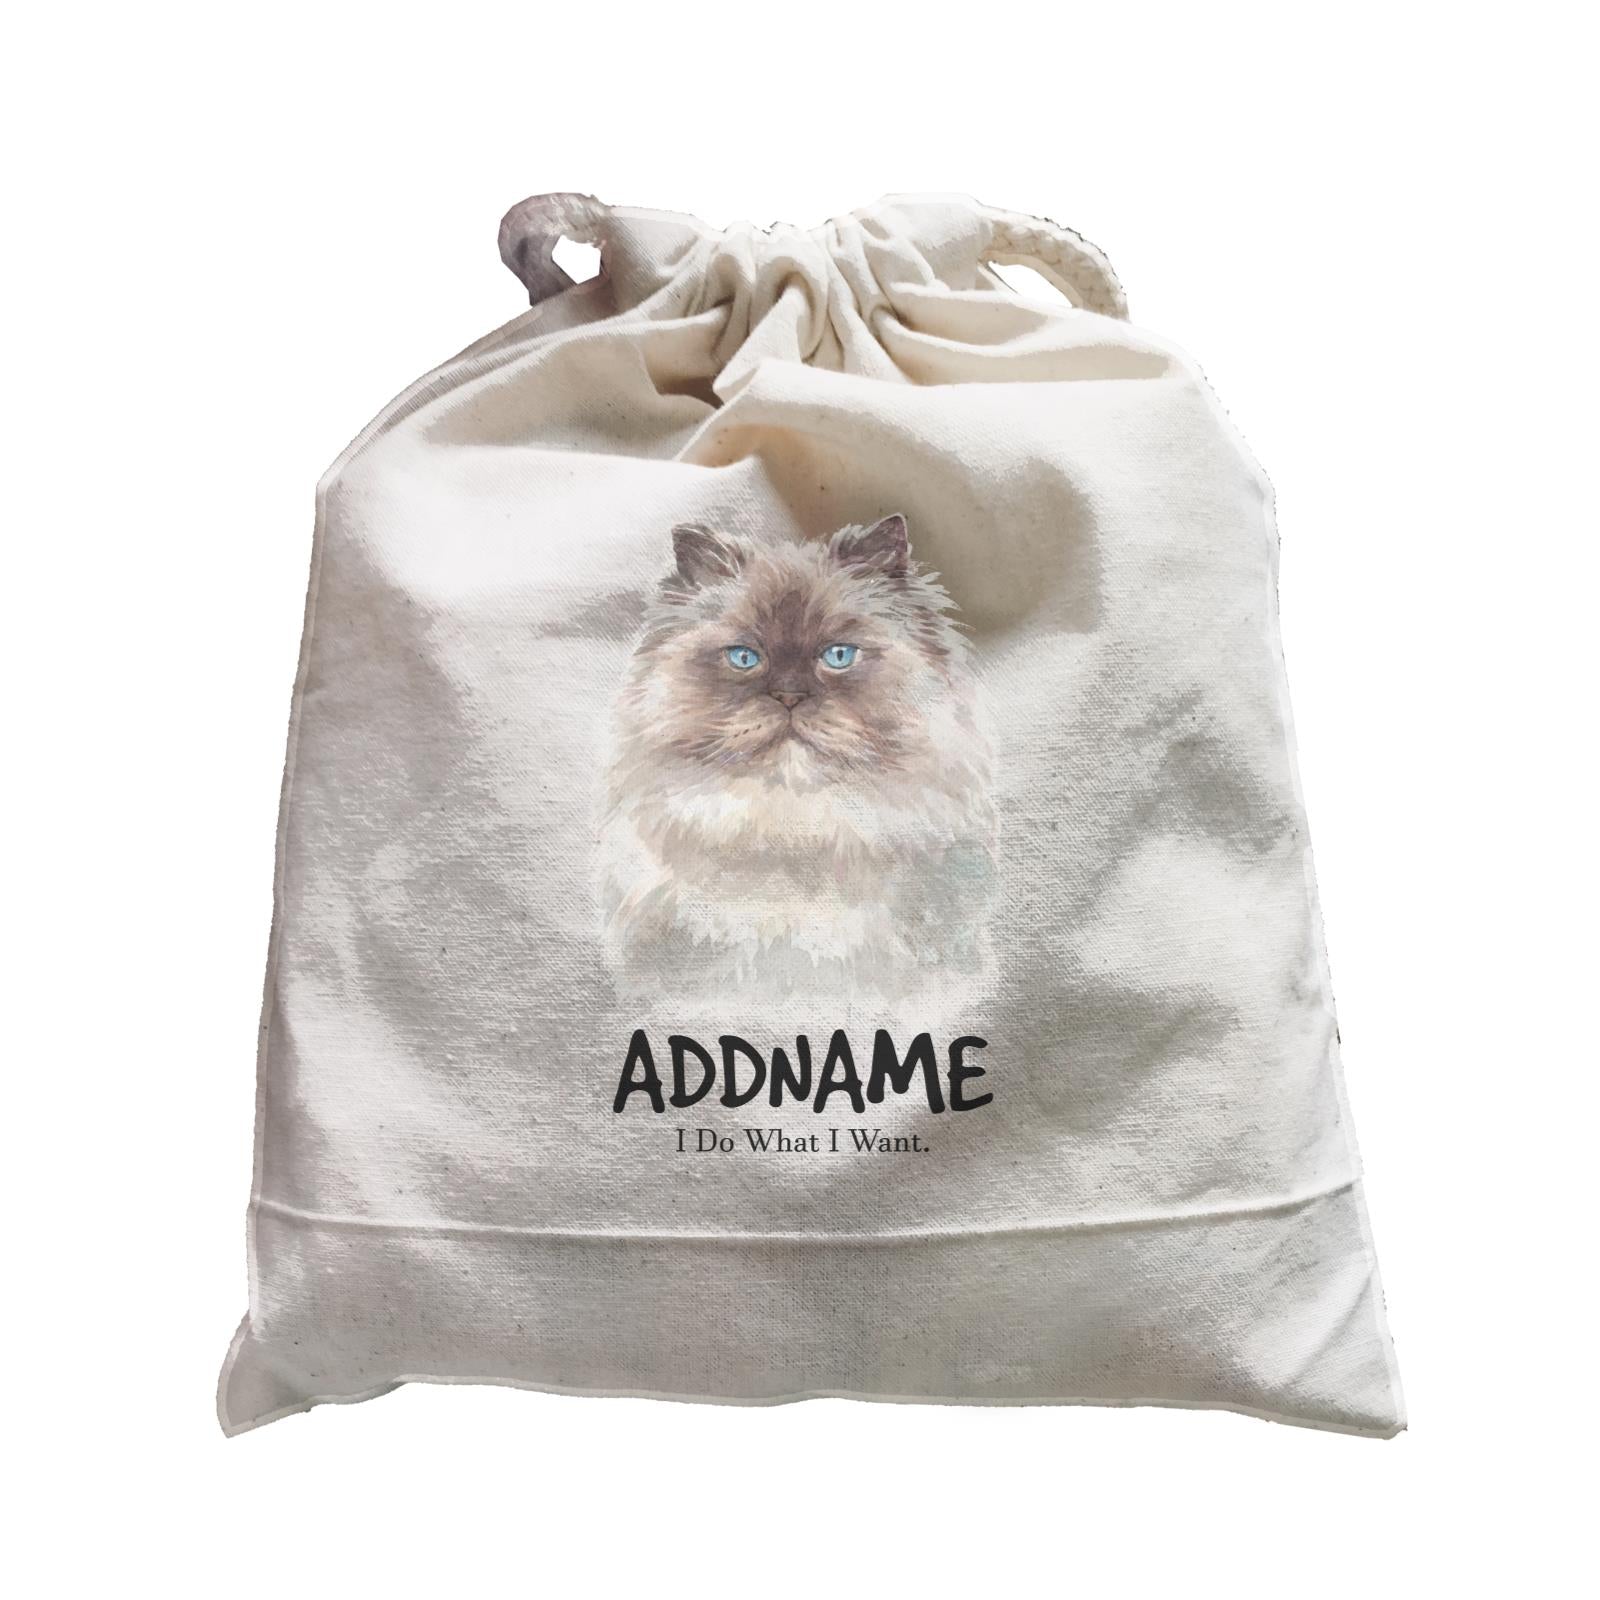 Watercolor Cat Himalayan Dark Face I Do What I Want Addname Satchel